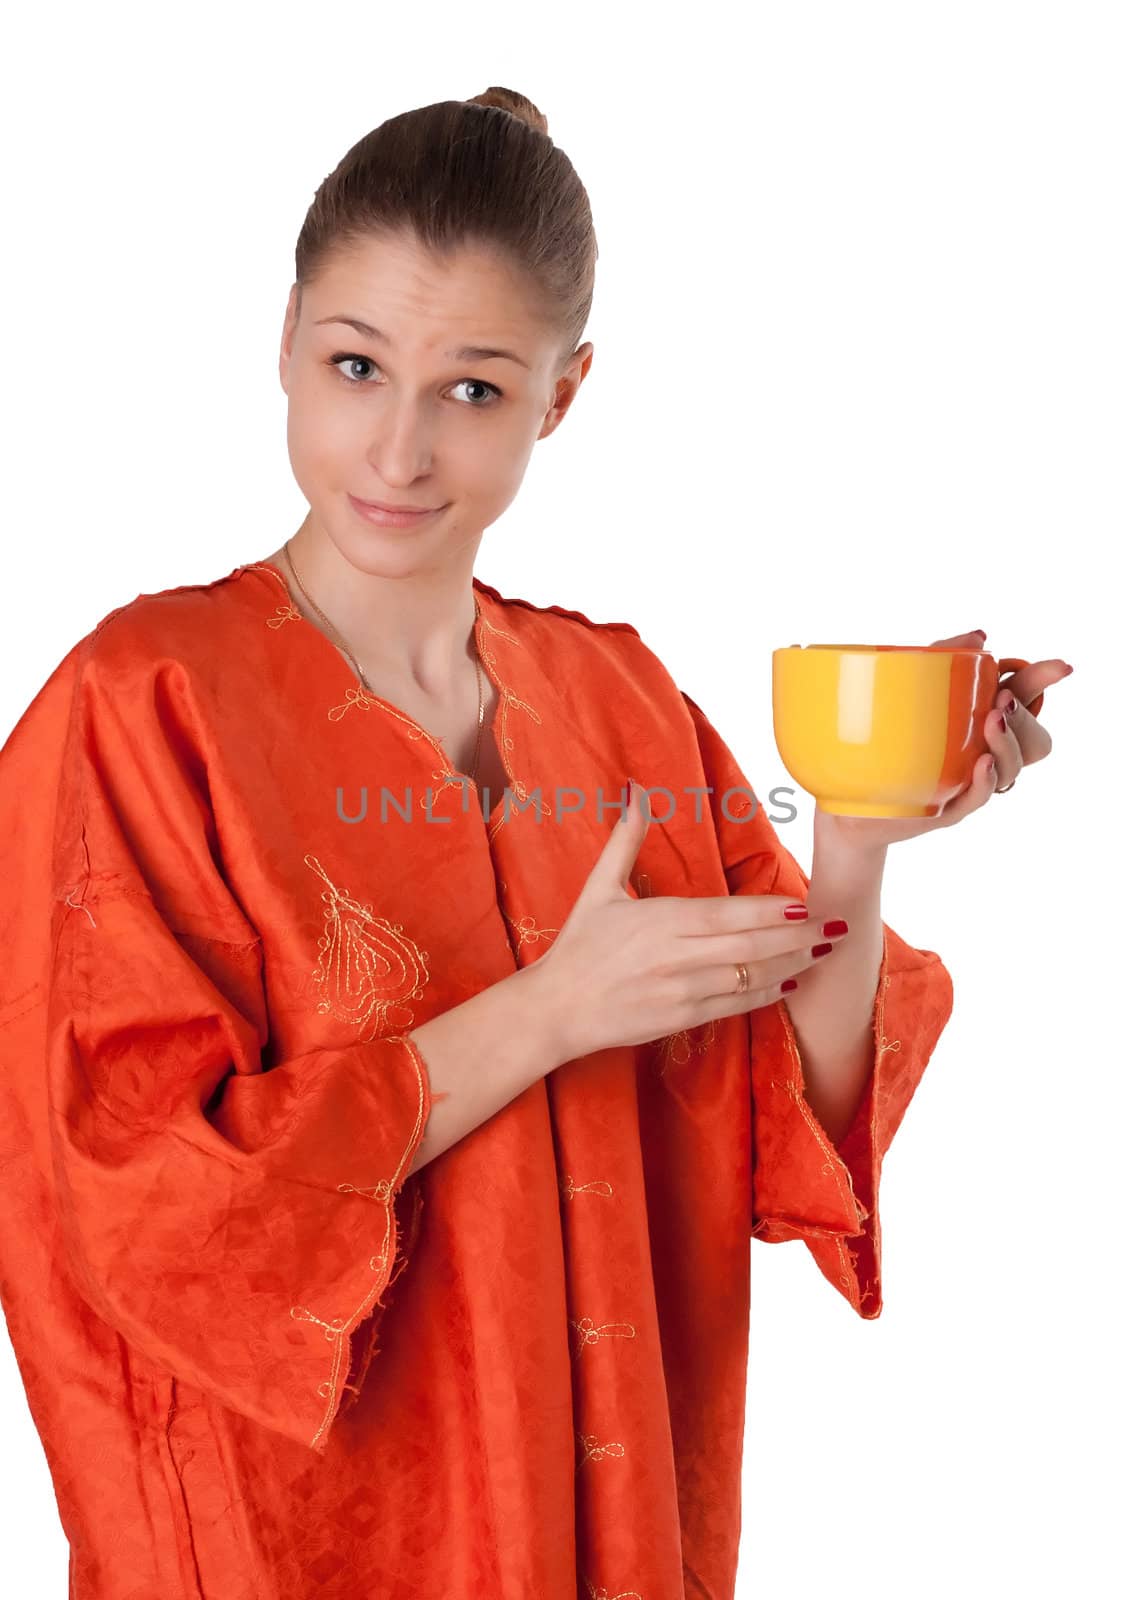 The girl in the orange robe offers tea by victosha